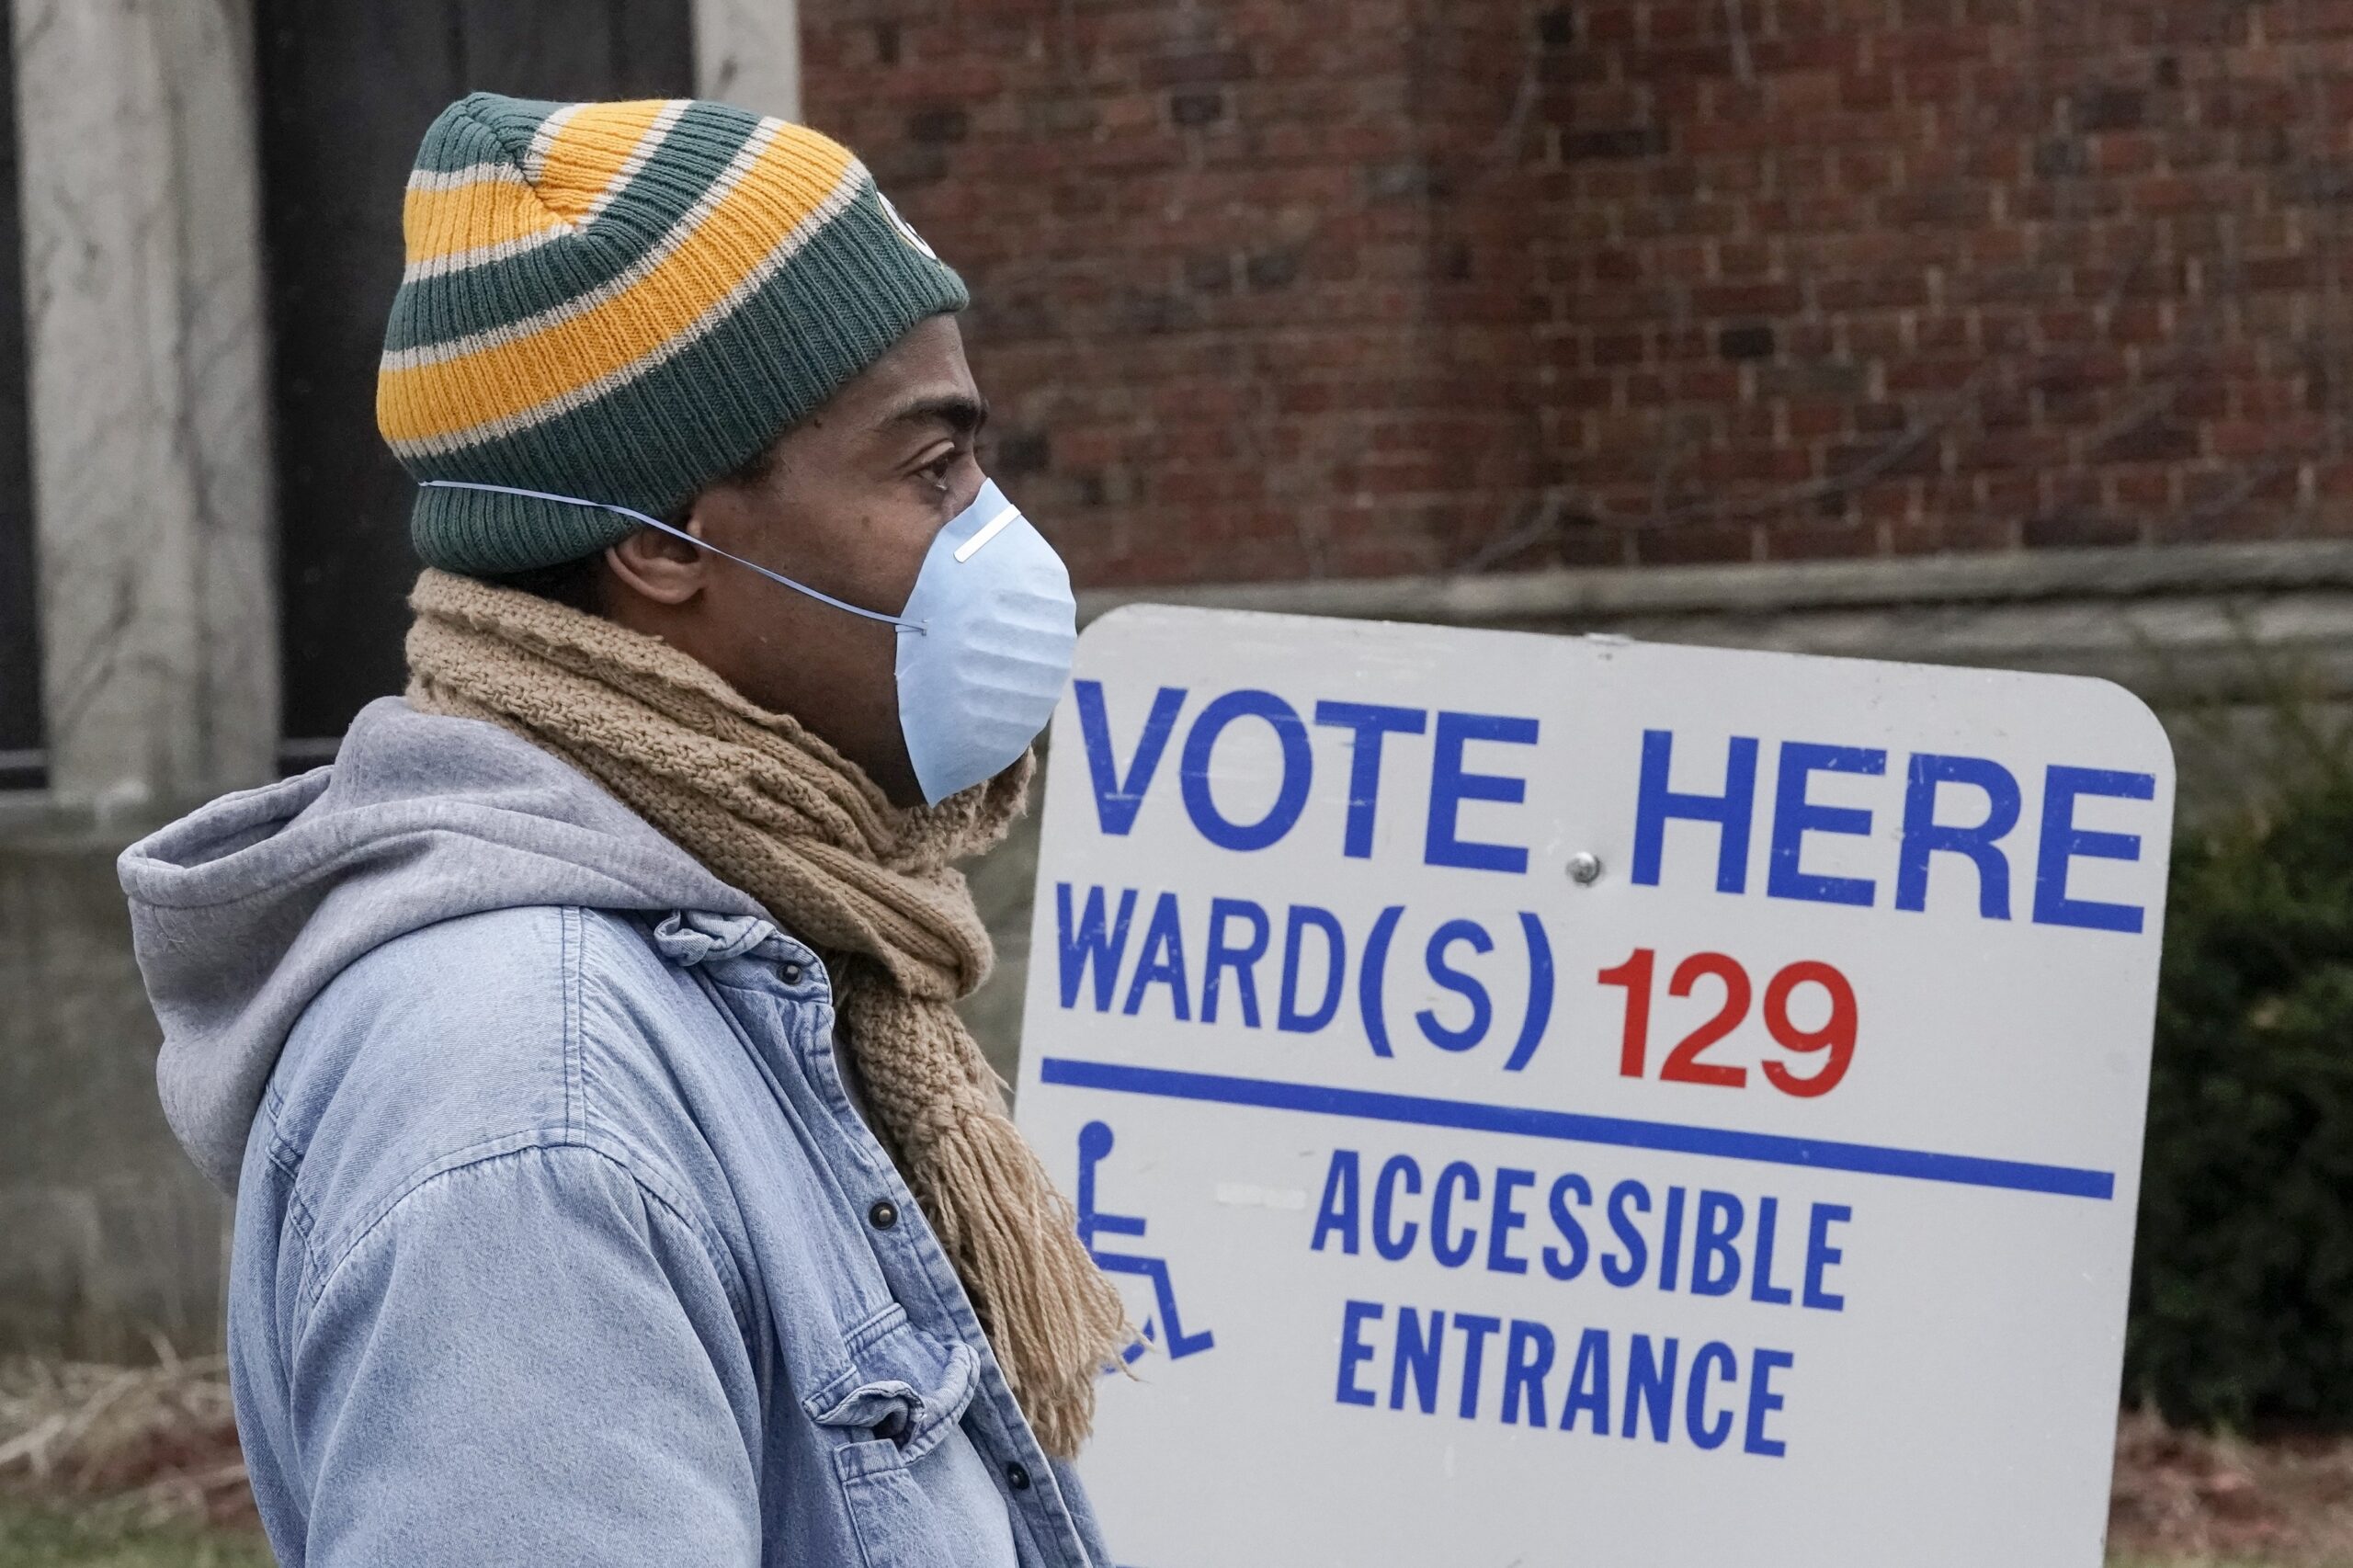 Voters in masks line up for Wisconsin's April primary election